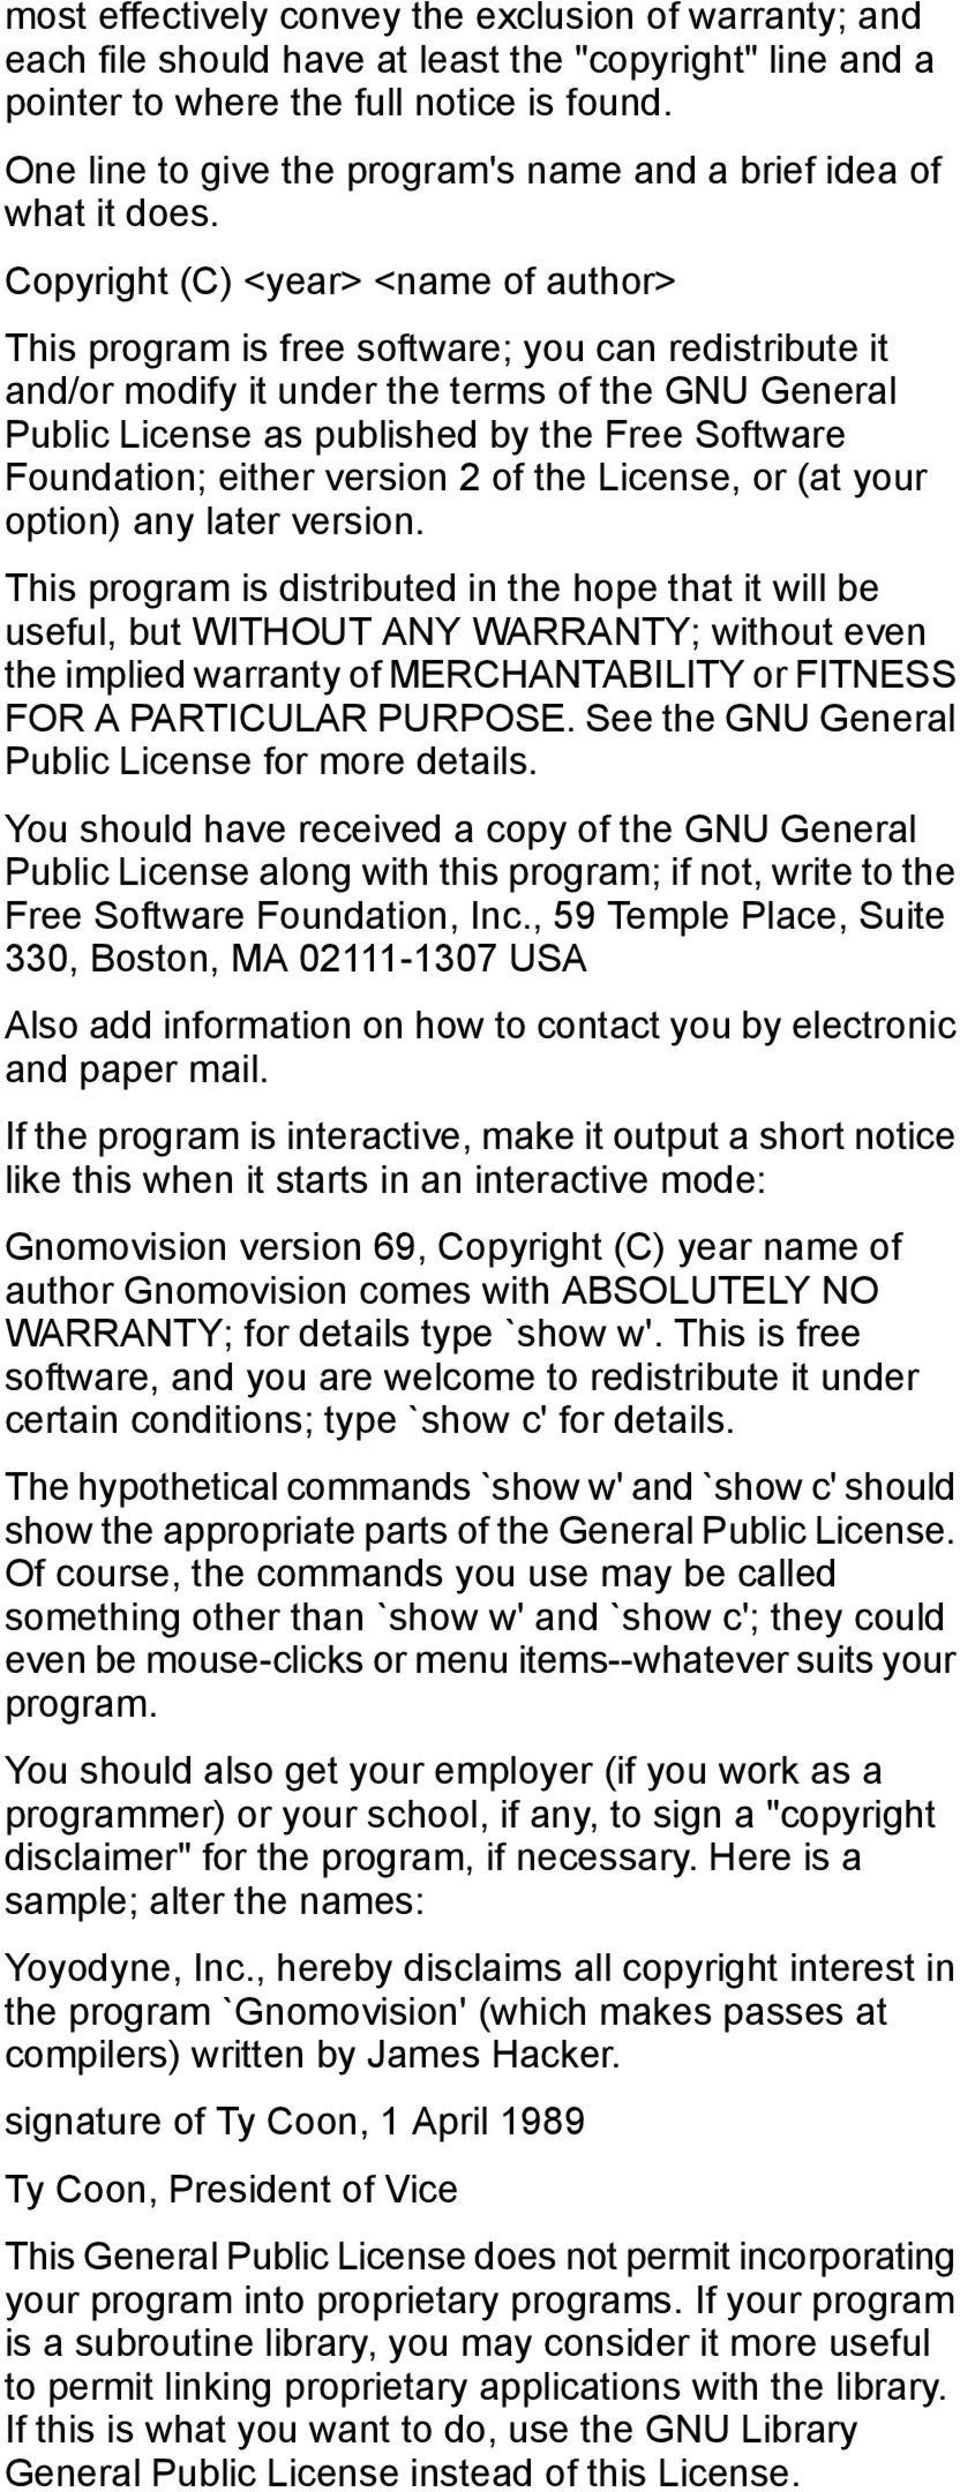 Copyright (C) <year> <name of author> This program is free software; you can redistribute it and/or modify it under the terms of the GNU General Public License as published by the Free Software